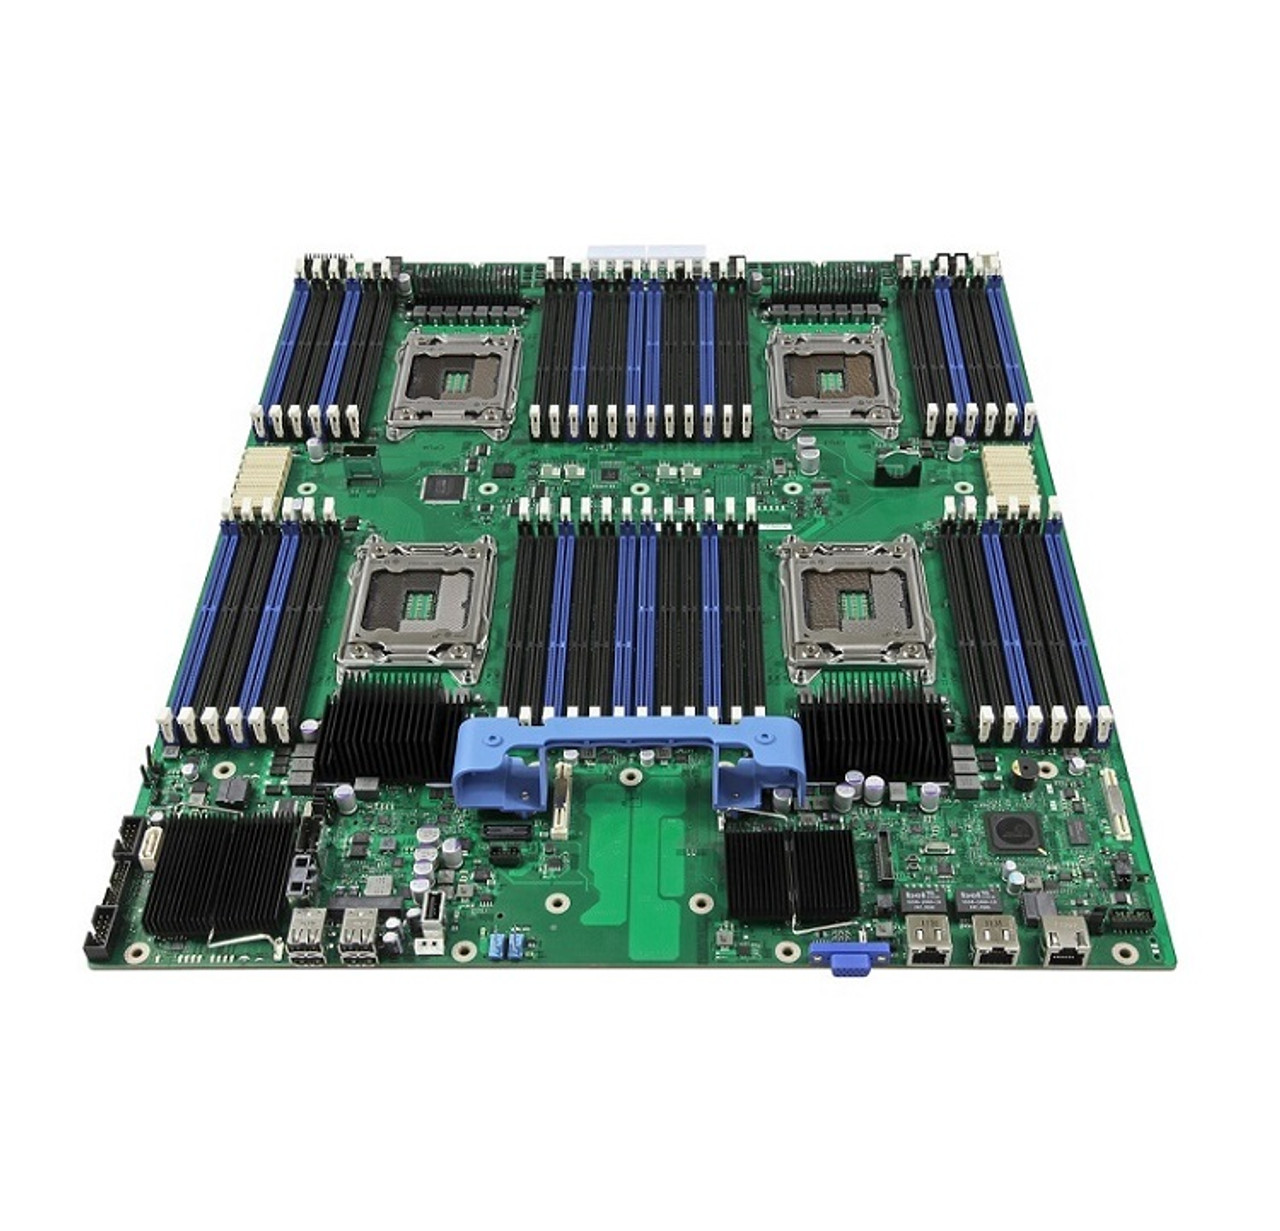 061P35 - Dell System Board (Motherboard) for PowerEdge R720 (Refurbished)